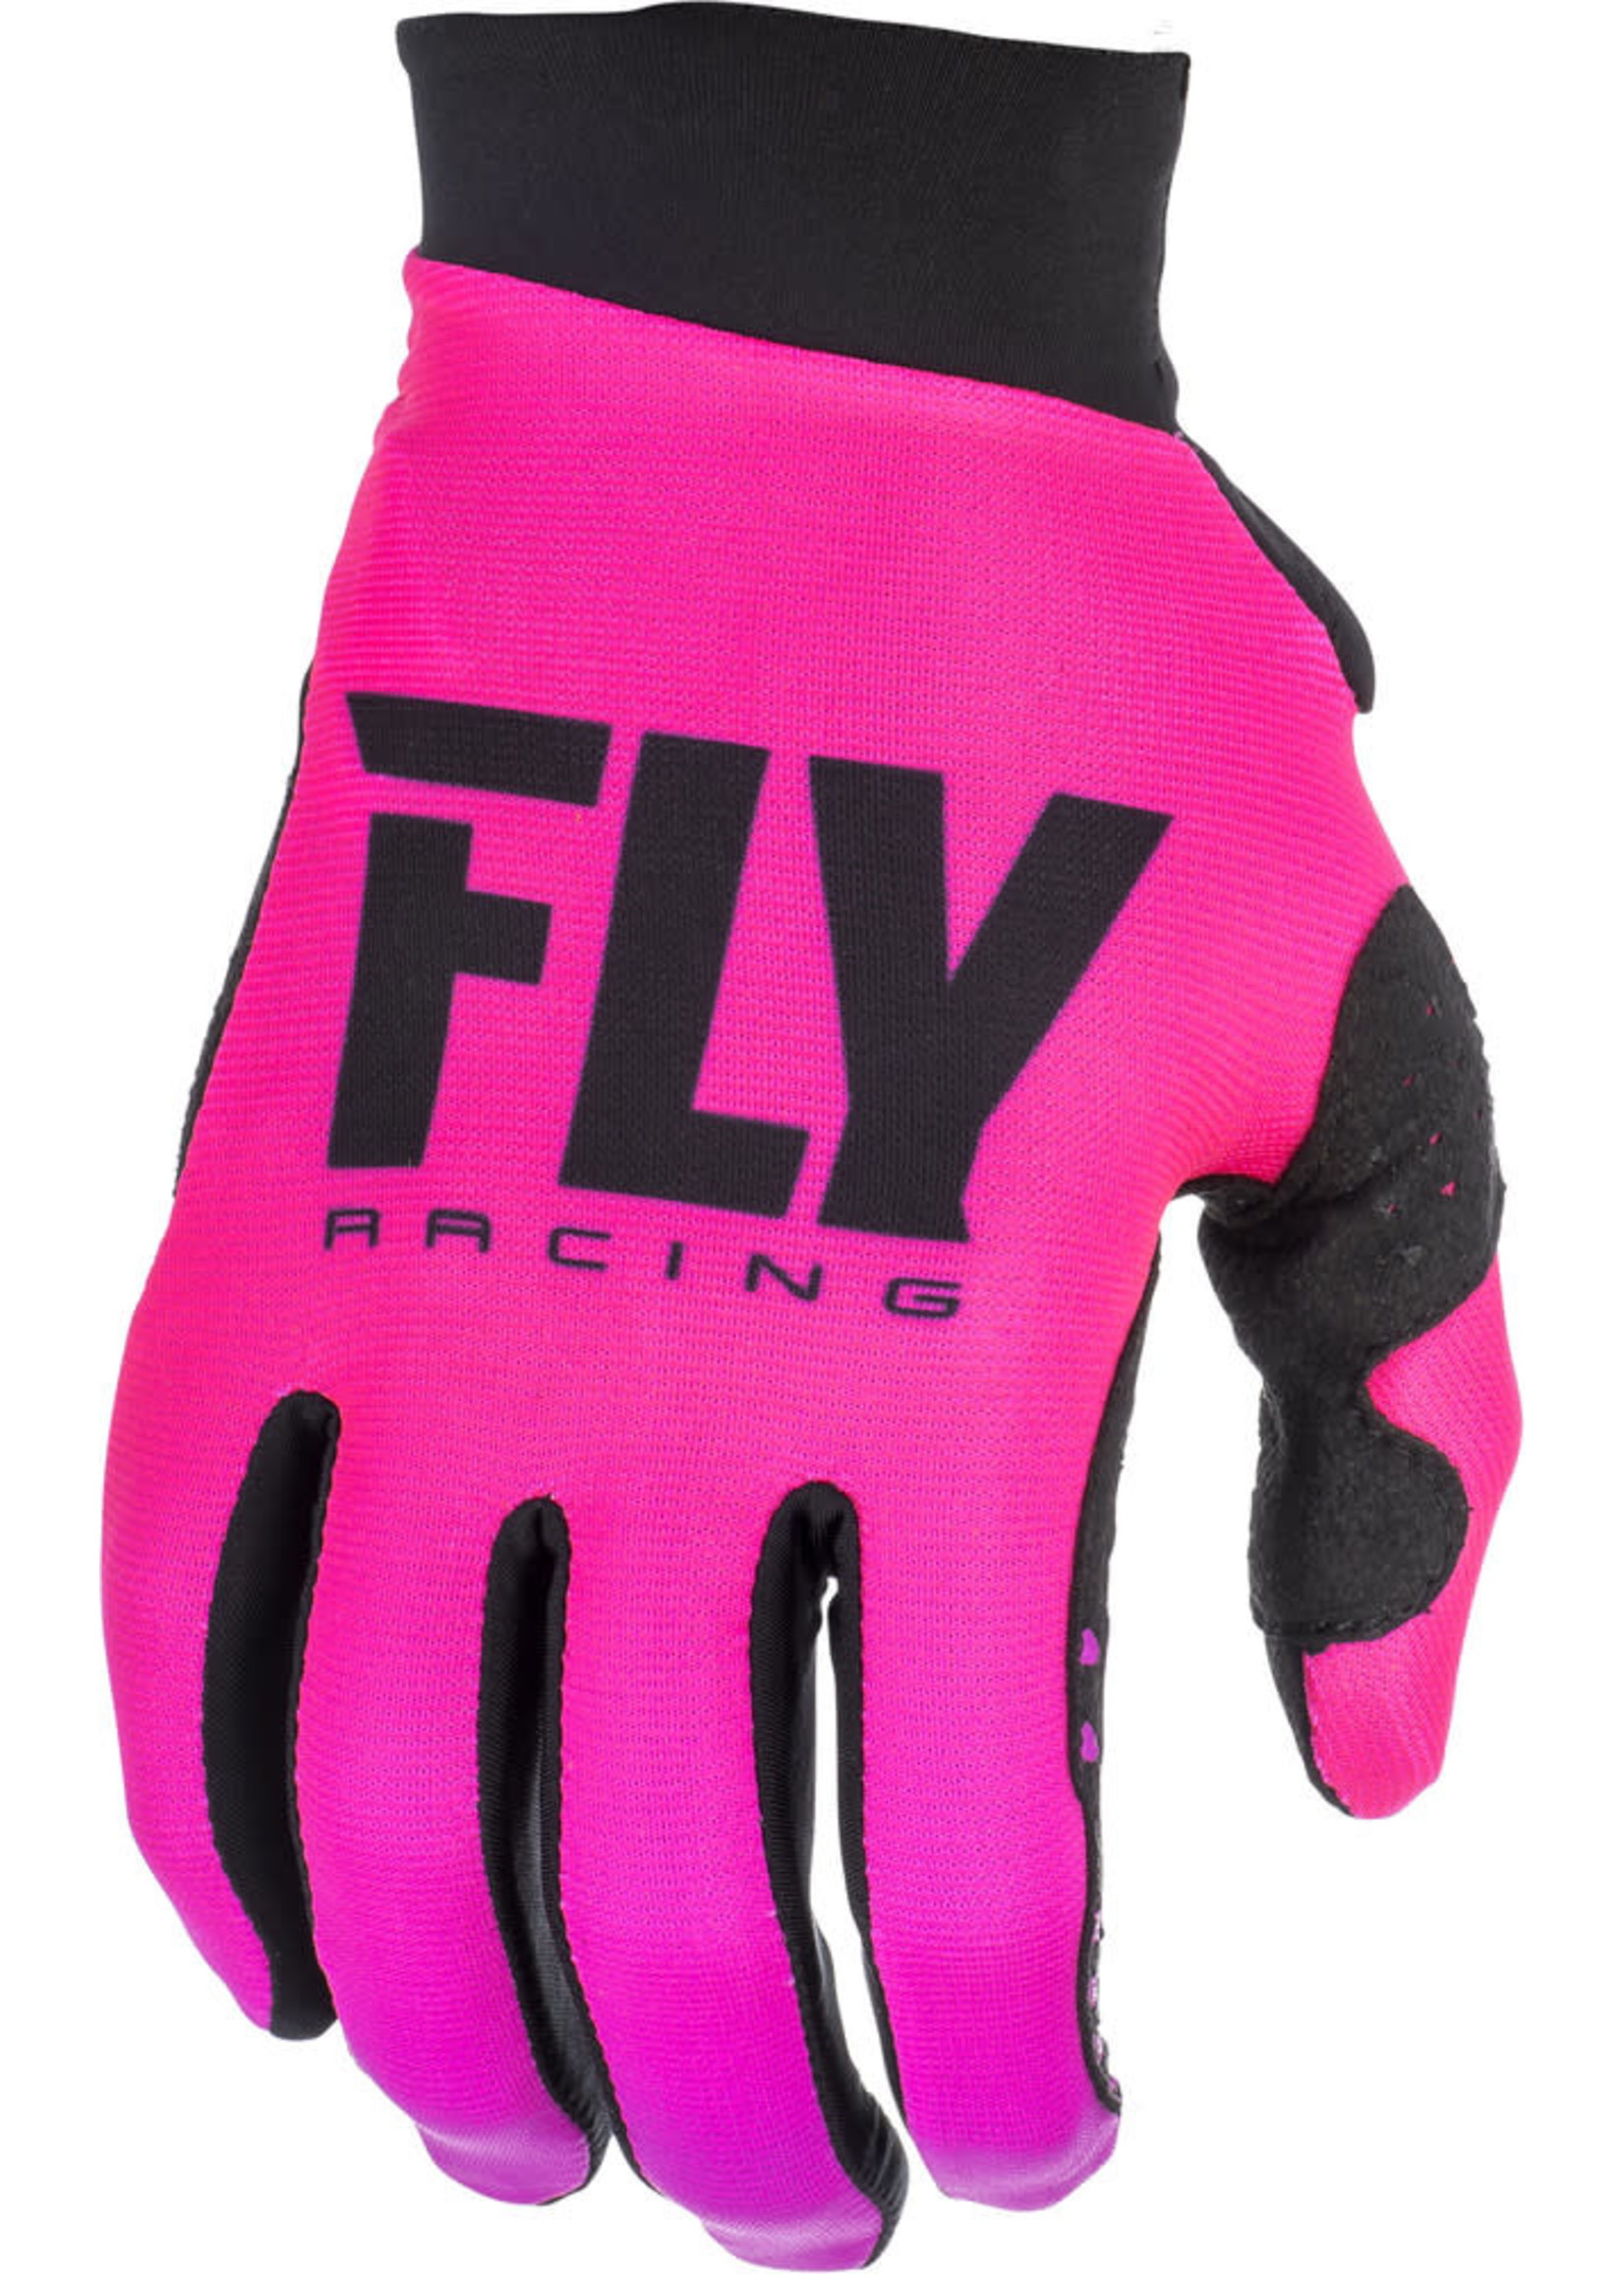 FLY RACING FLY WMNS PRO LITE GLOVE NEON PINK/BLK YOUTH SZ 4